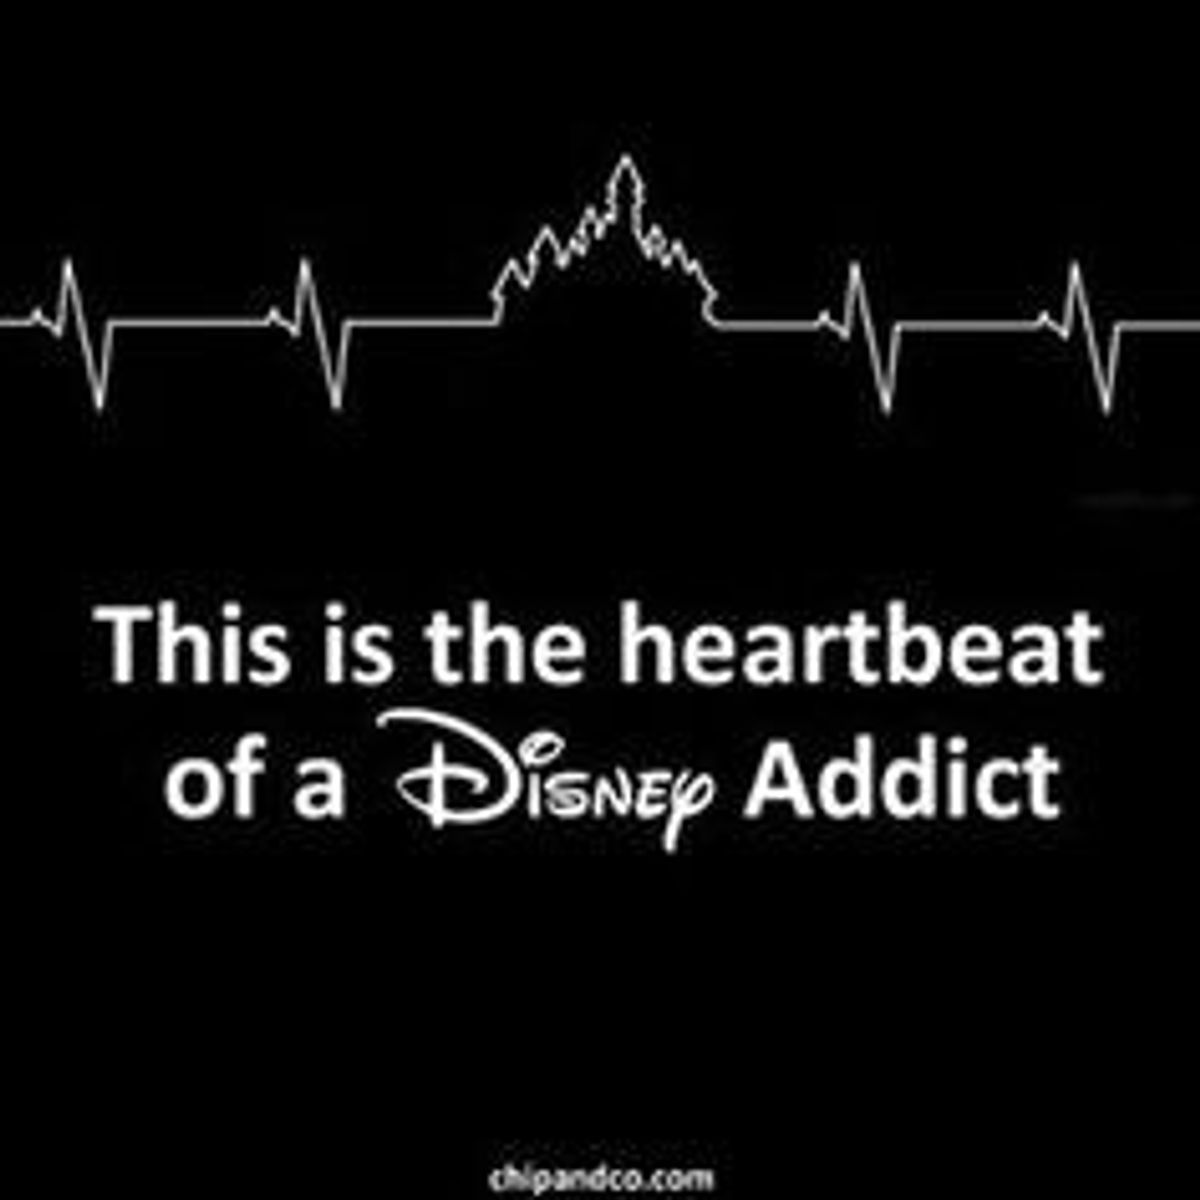 You Know You're A Disney Addict When